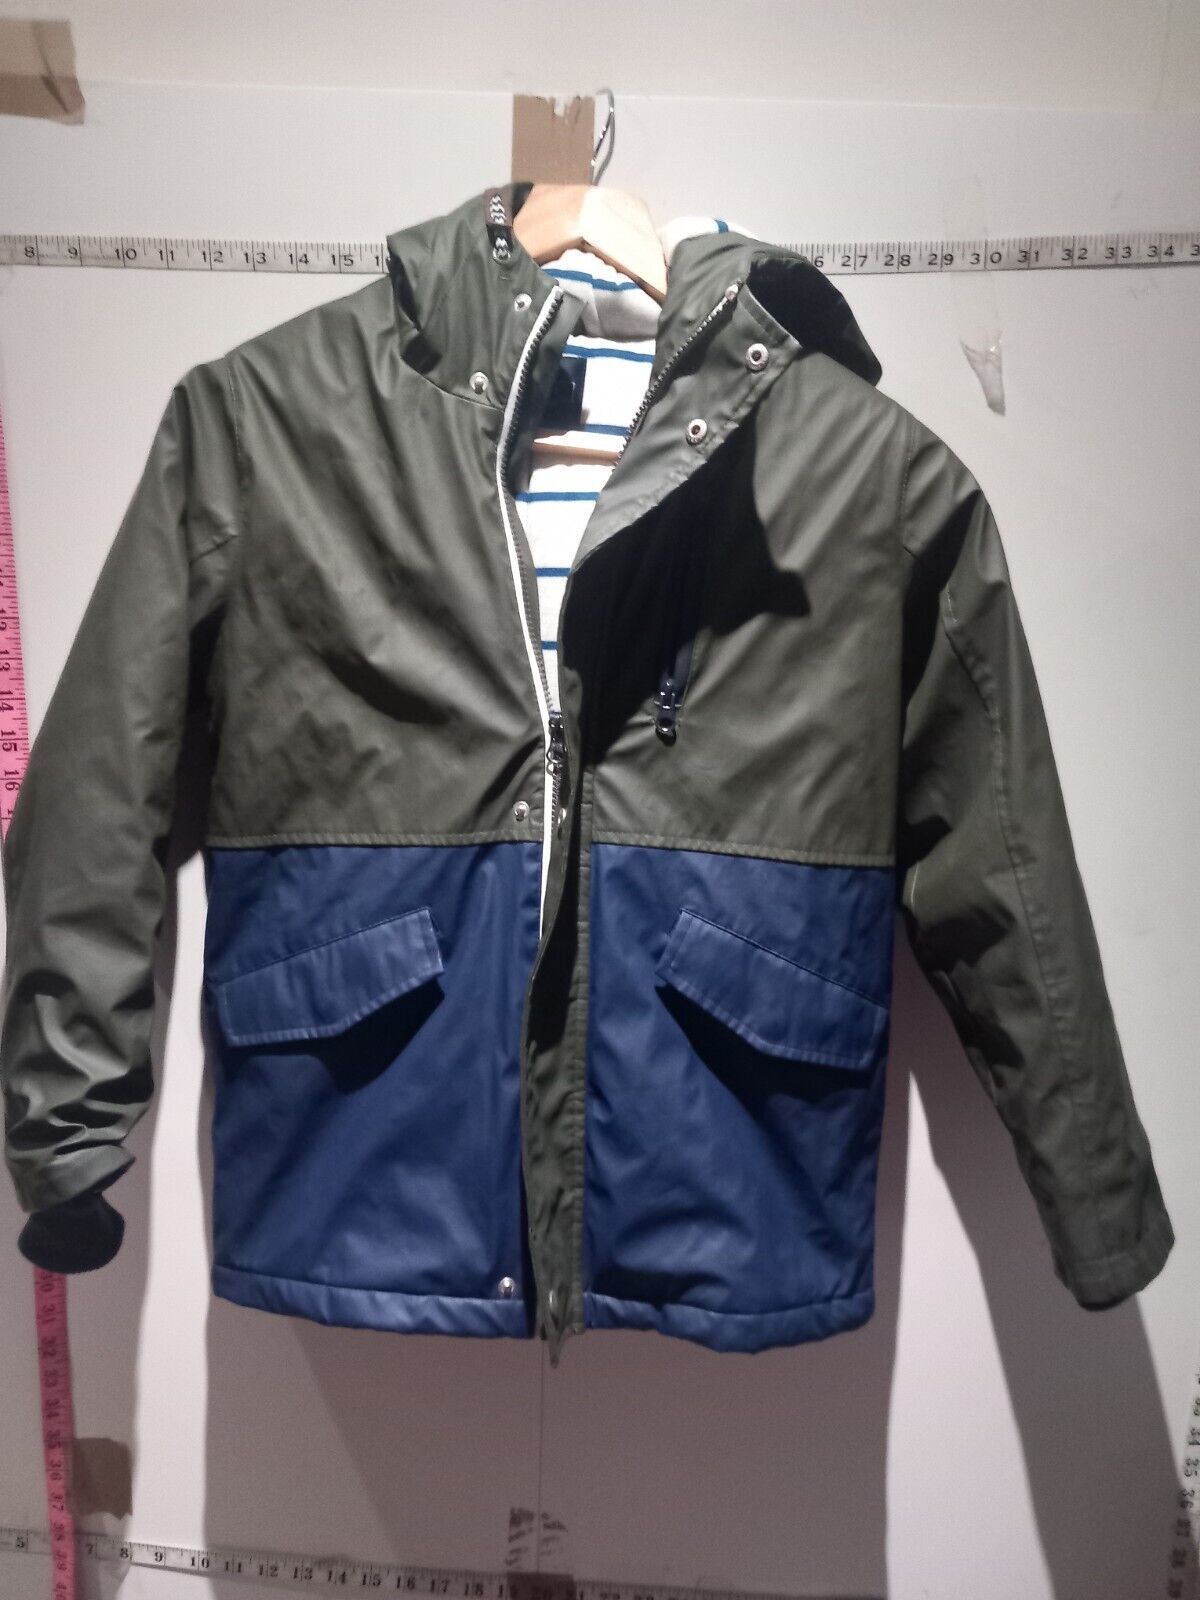 Primary image for Boys Waterproof Jacket Size 10 years old Green/Blue JACKET EXPRESS SHIPPING